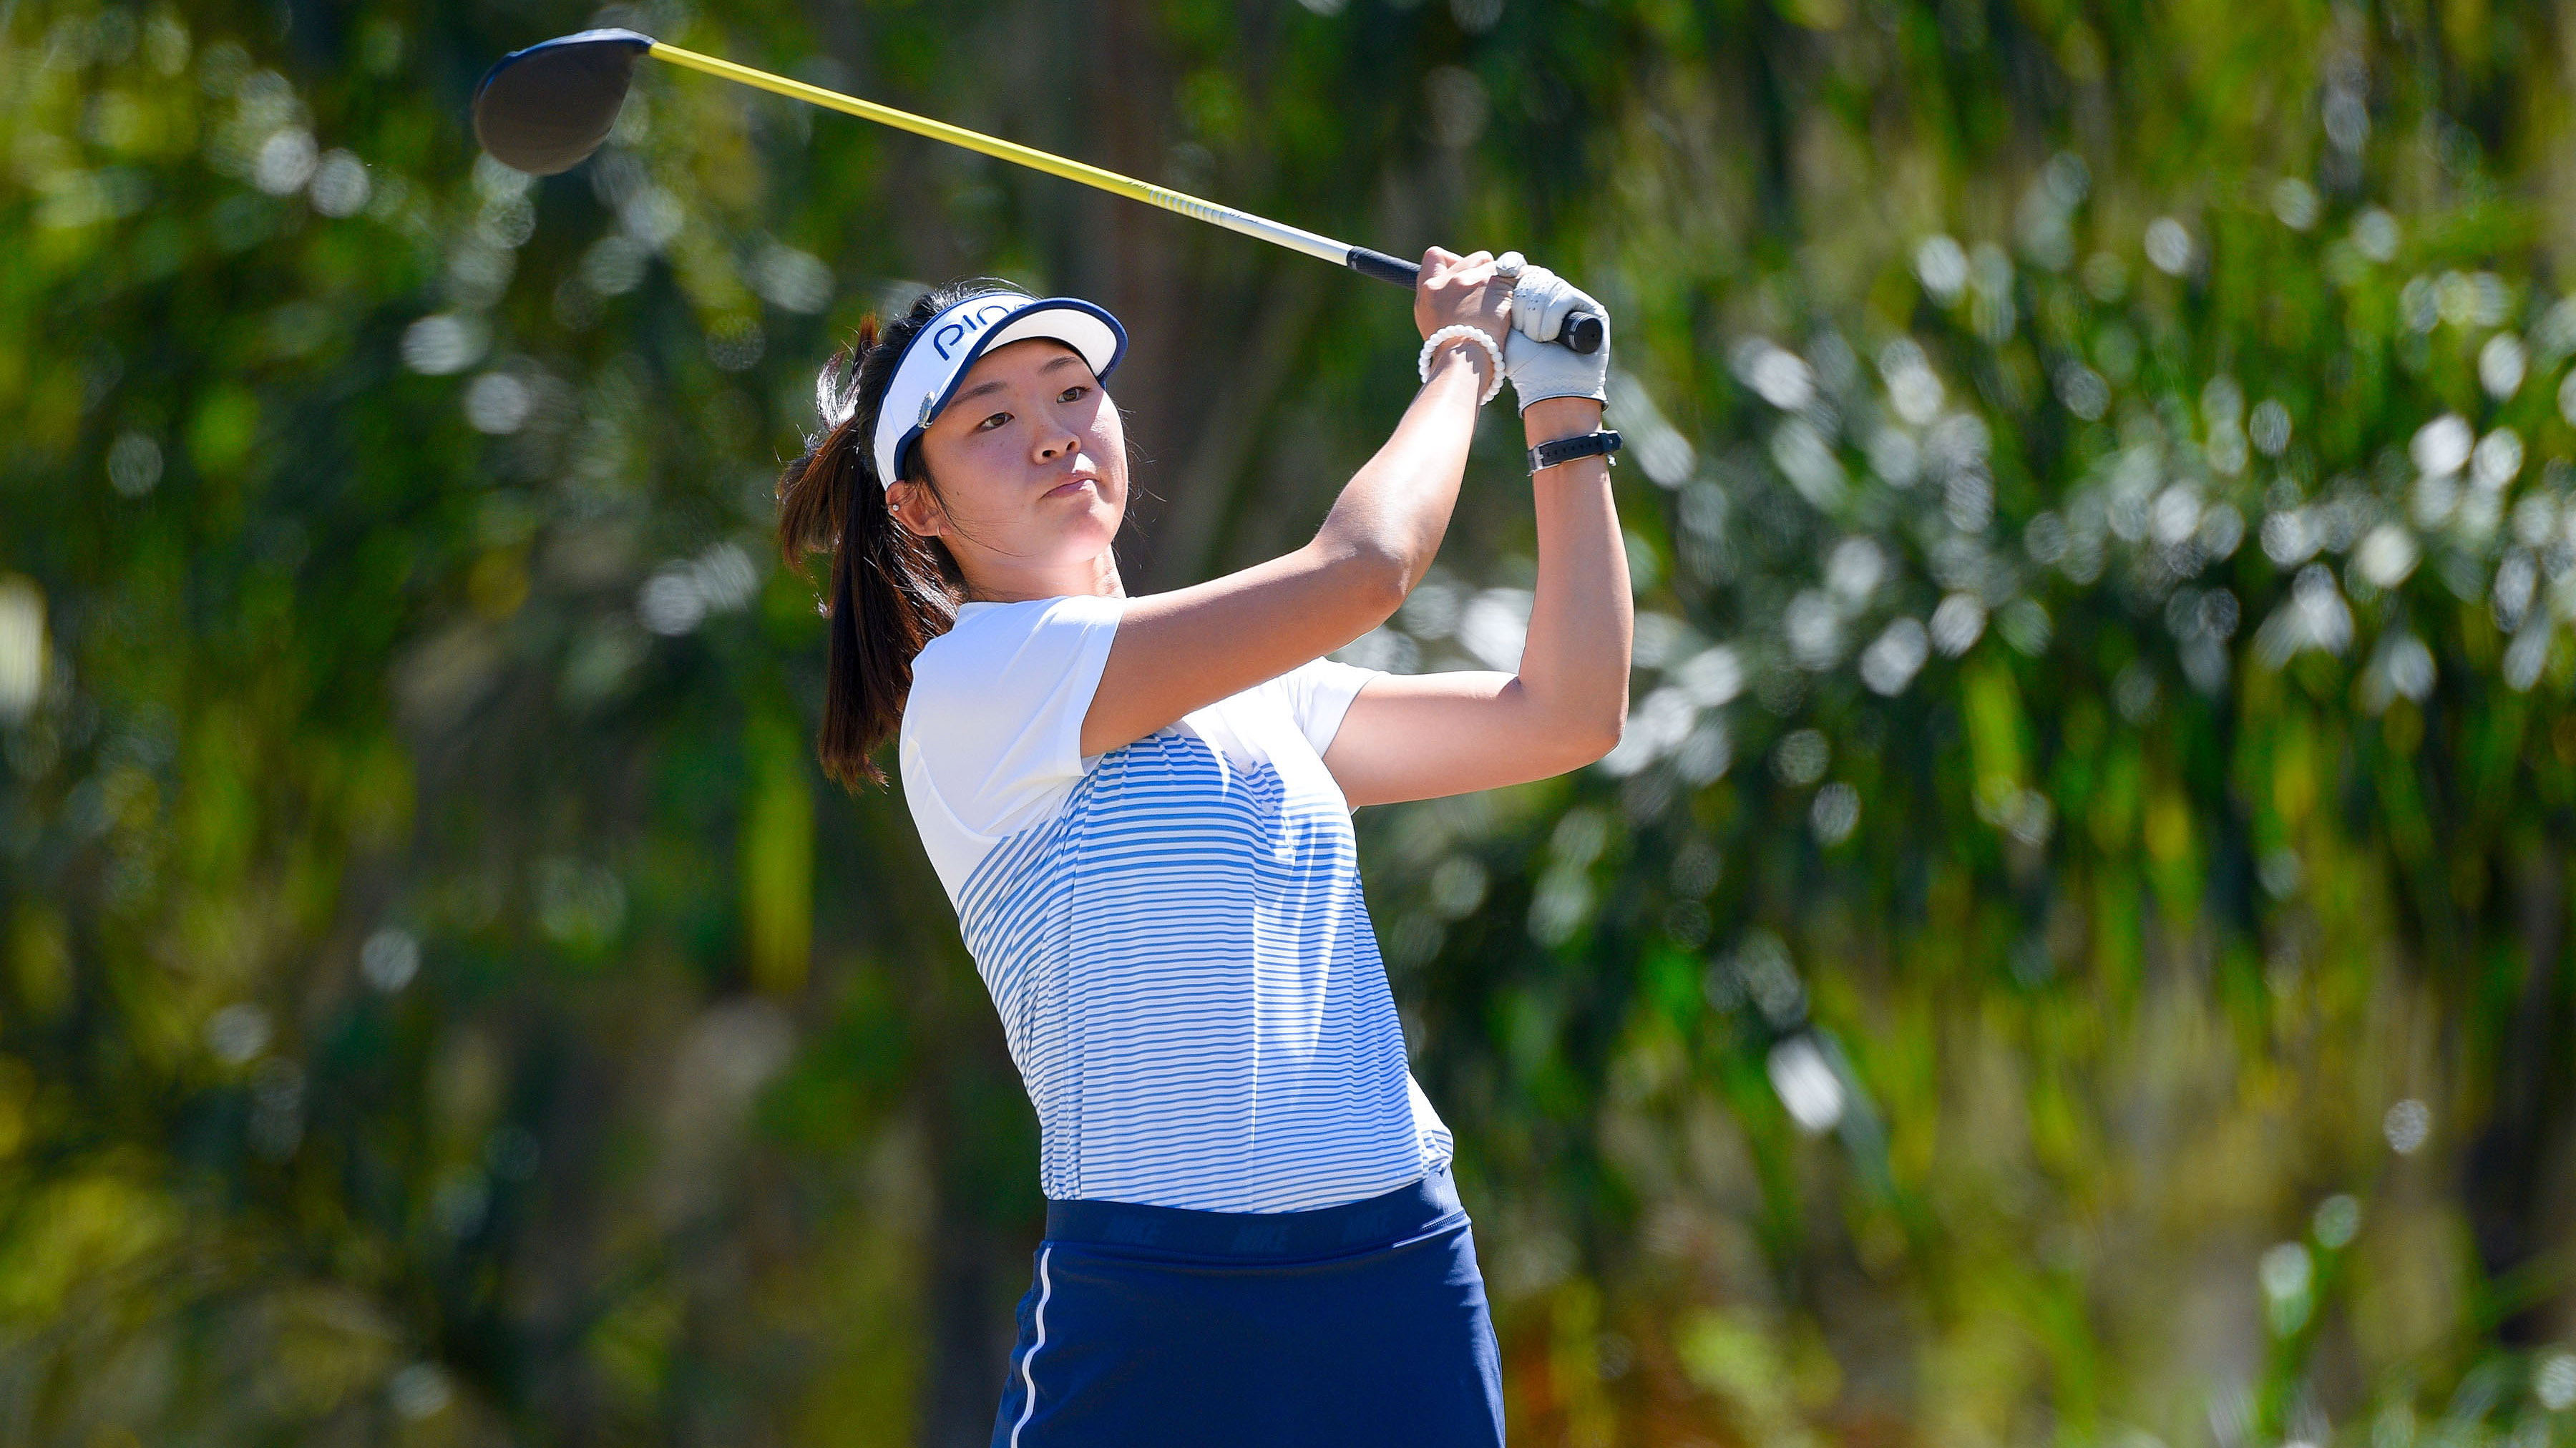 Thankful for the Game: Lee Fulfills LPGA Dream in Late Mother's Memory